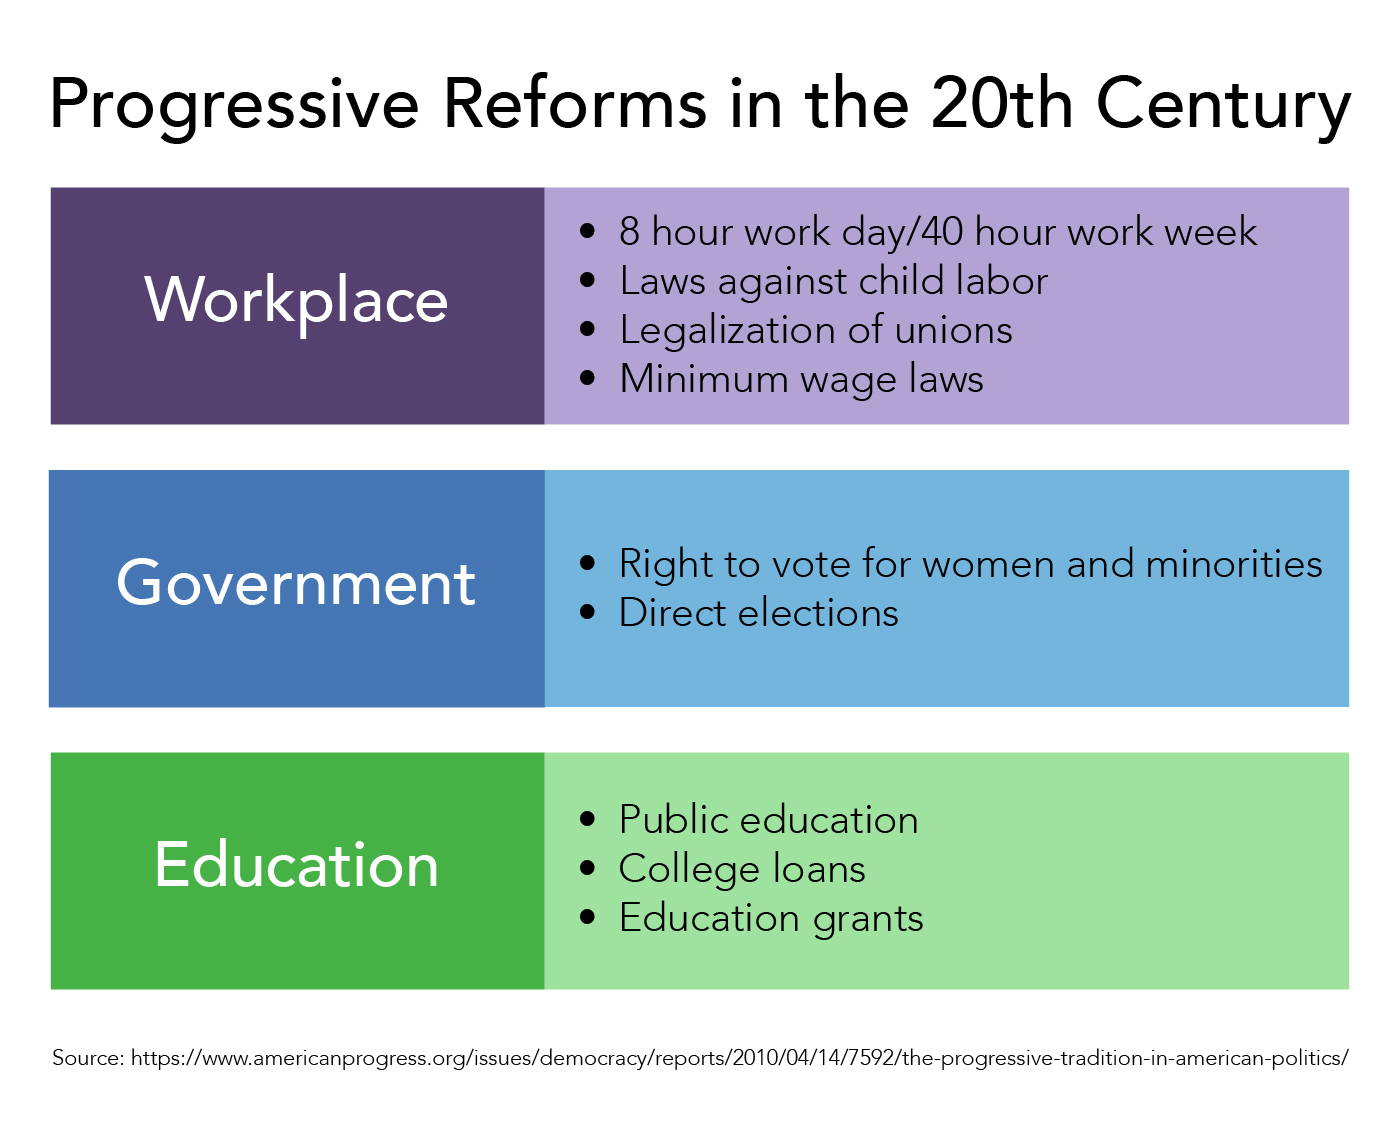 Progressive Reforms in the 20th Century in the Workplace, Government, and Education. Workplace reforms include the 8 hour work day and 40 hour work week, laws against child labor, legalization of unions, and minimum wage laws. Government reforms include the right to vote for women and minorities and direct elections. Education reforms include public education, college loans, and education grants.